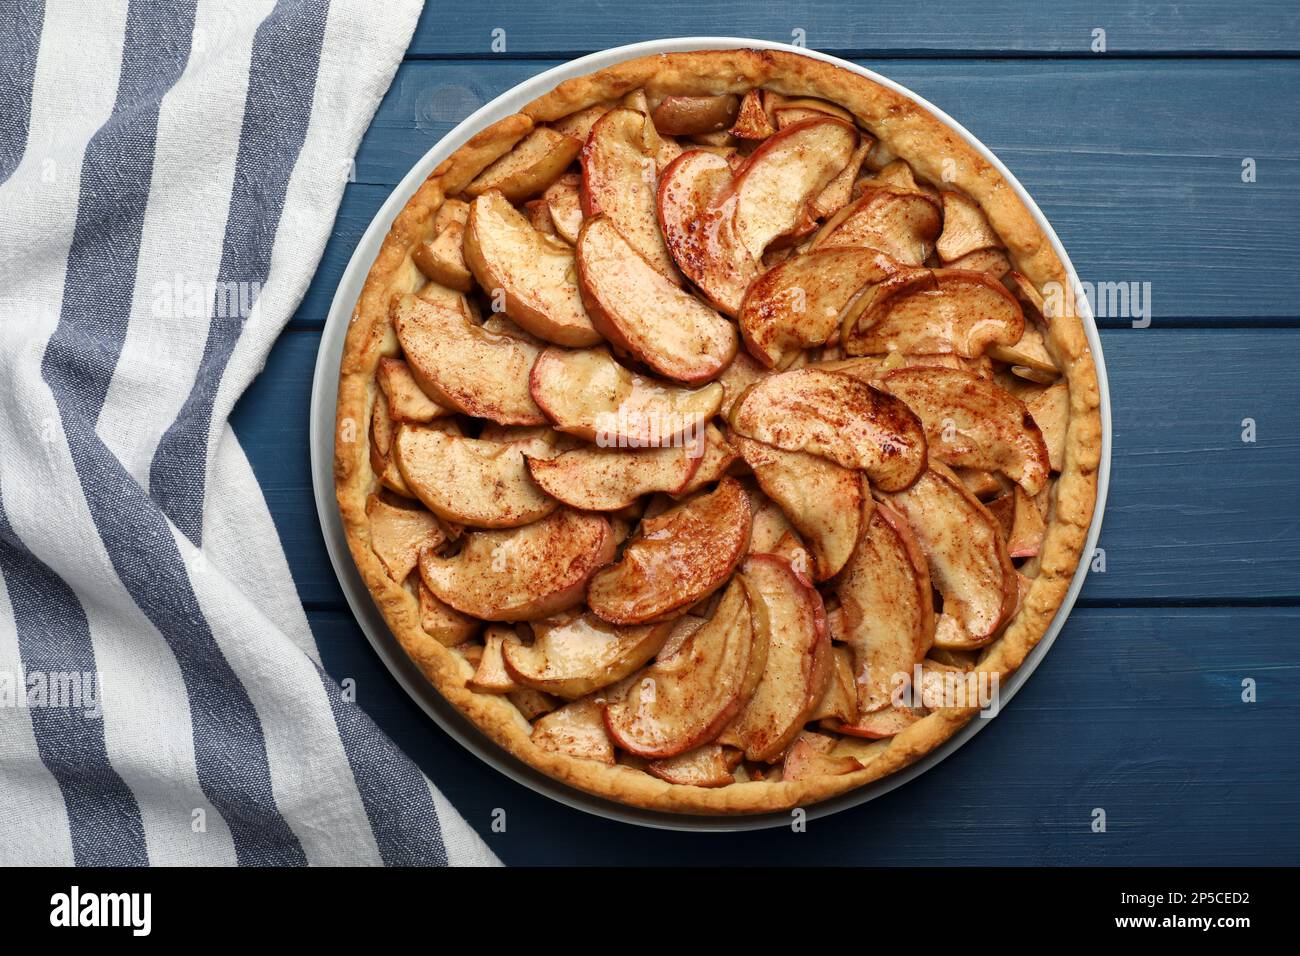 Delicious apple pie on blue wooden table, top view Stock Photo